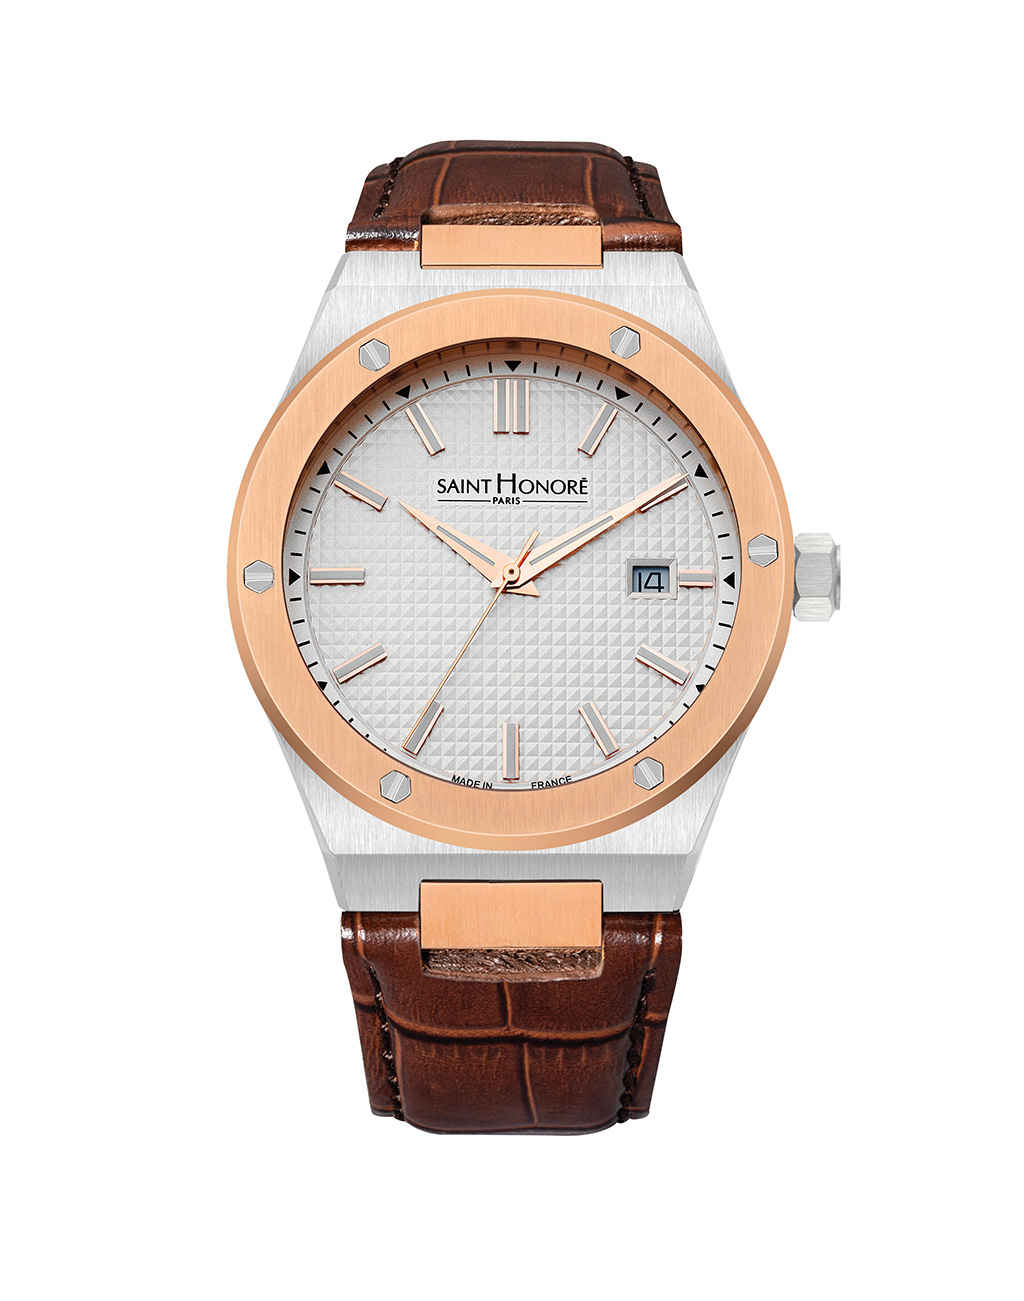 HAUSSMAN II Men's watch - Two-tone ion plating rose gold case, white dial, brown leather strap